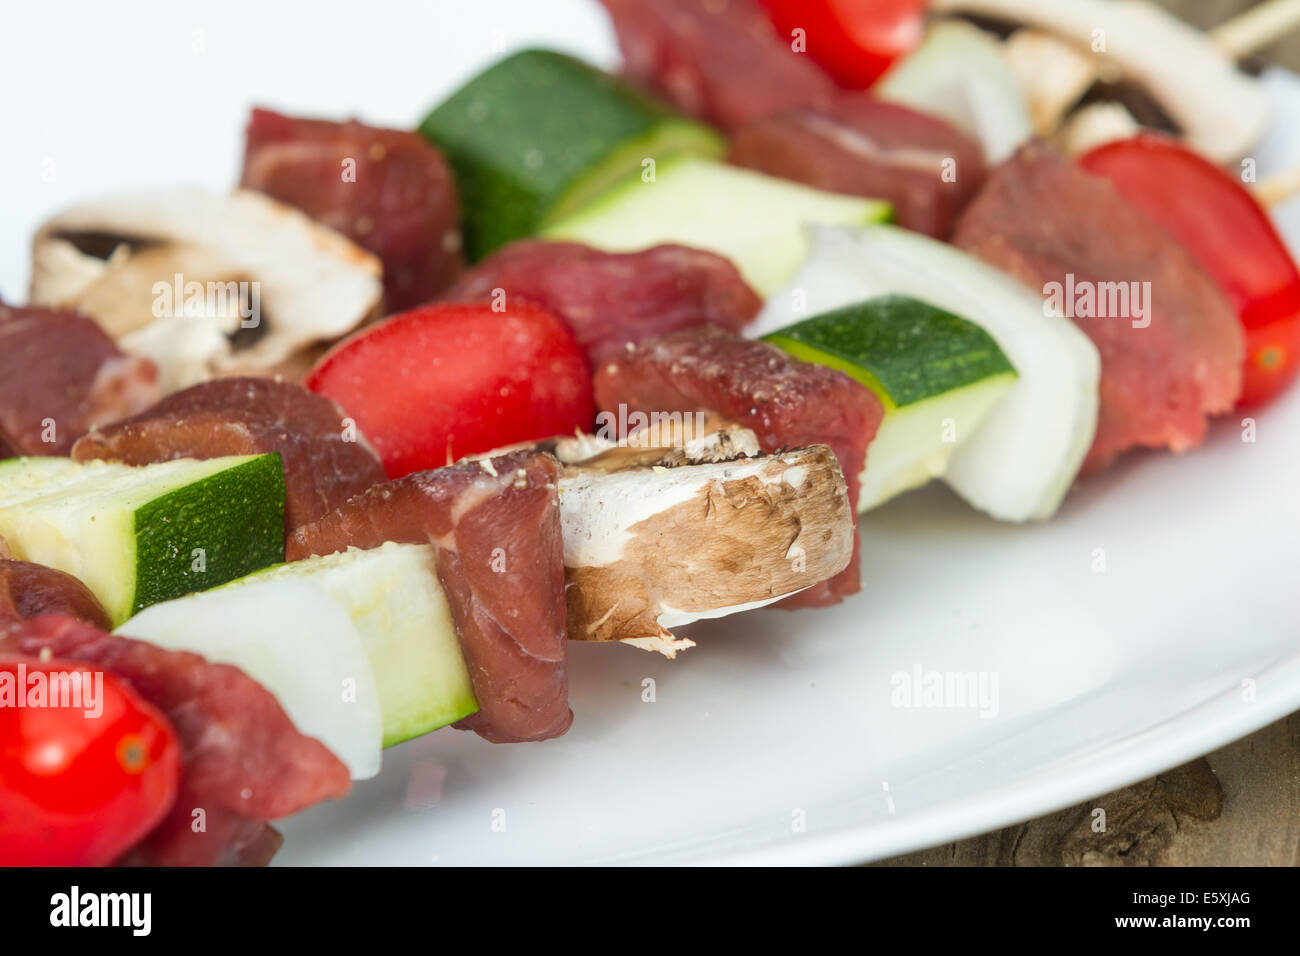 meat skewers on a plate with seasonings for an outdoor meal Stock Photo